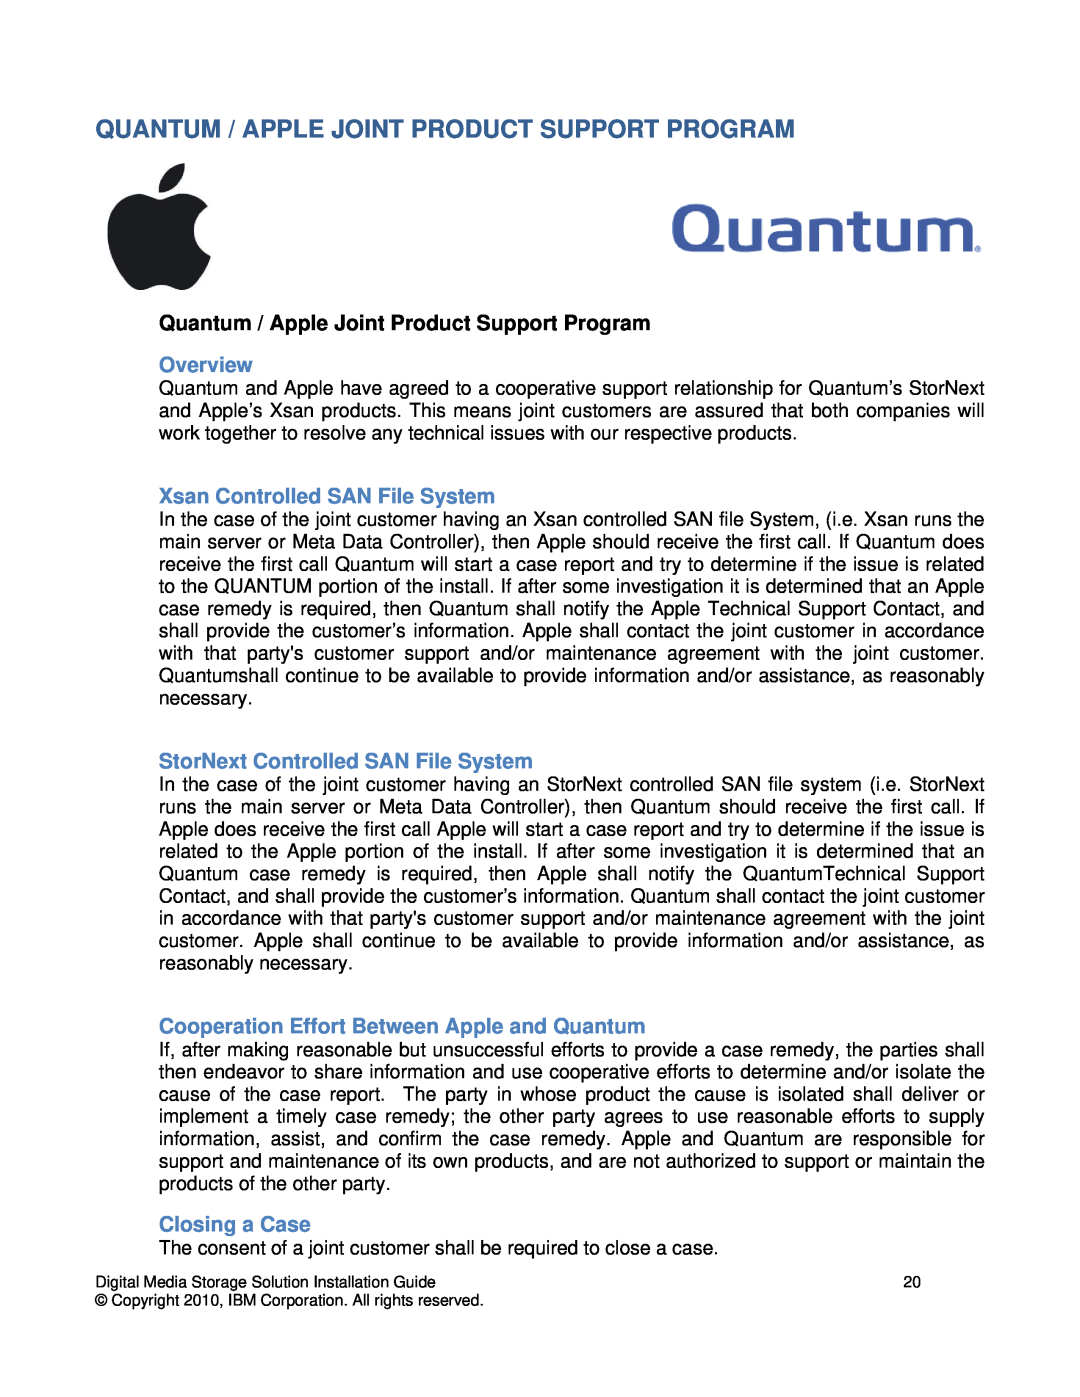 IBM DS3000 manual Quantum / Apple Joint Product Support Program, Overview, Xsan Controlled SAN File System, Closing a Case 